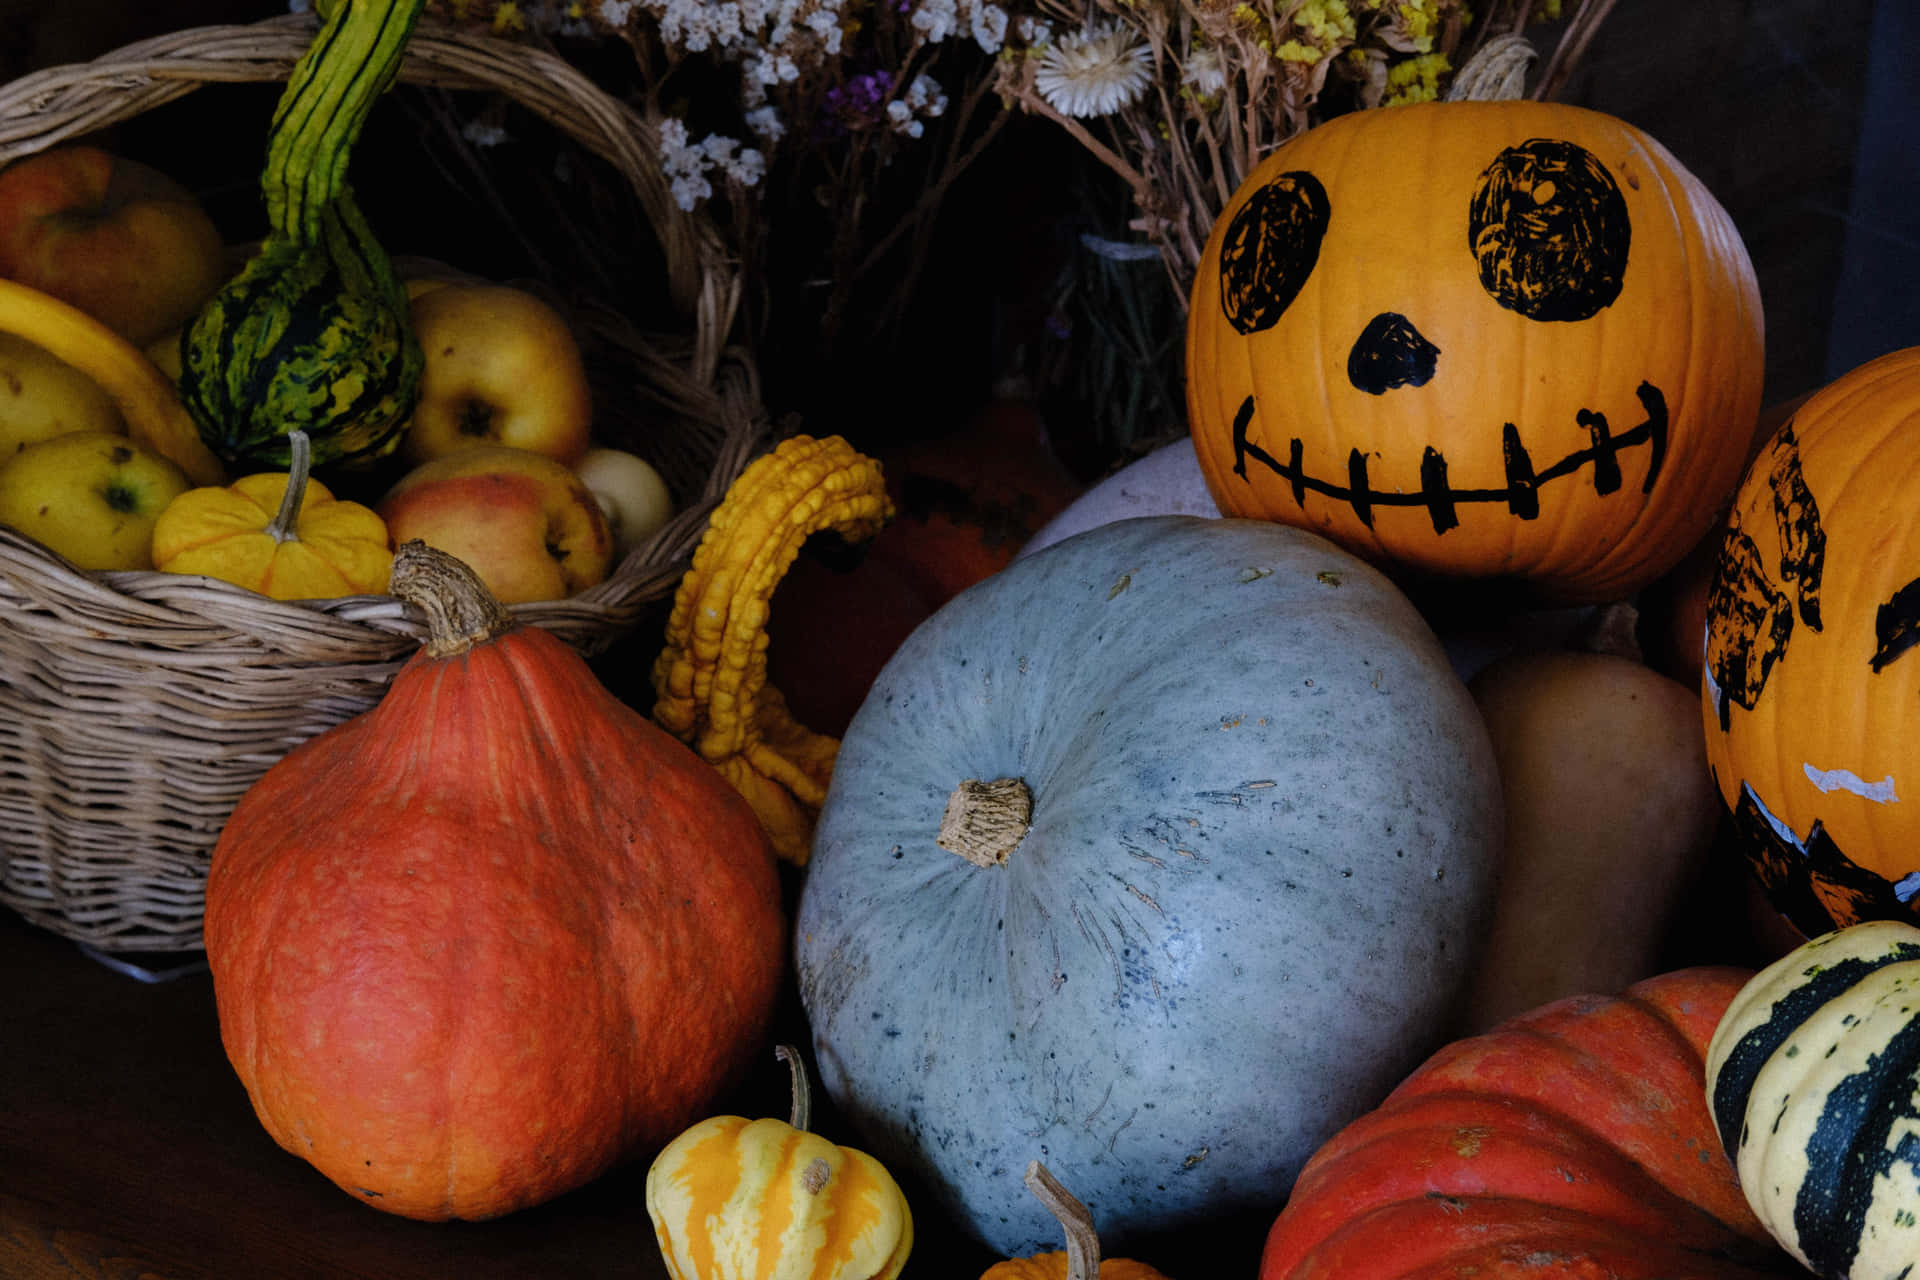 Enjoy the Harvest Fun at the Local Pumpkin Patch